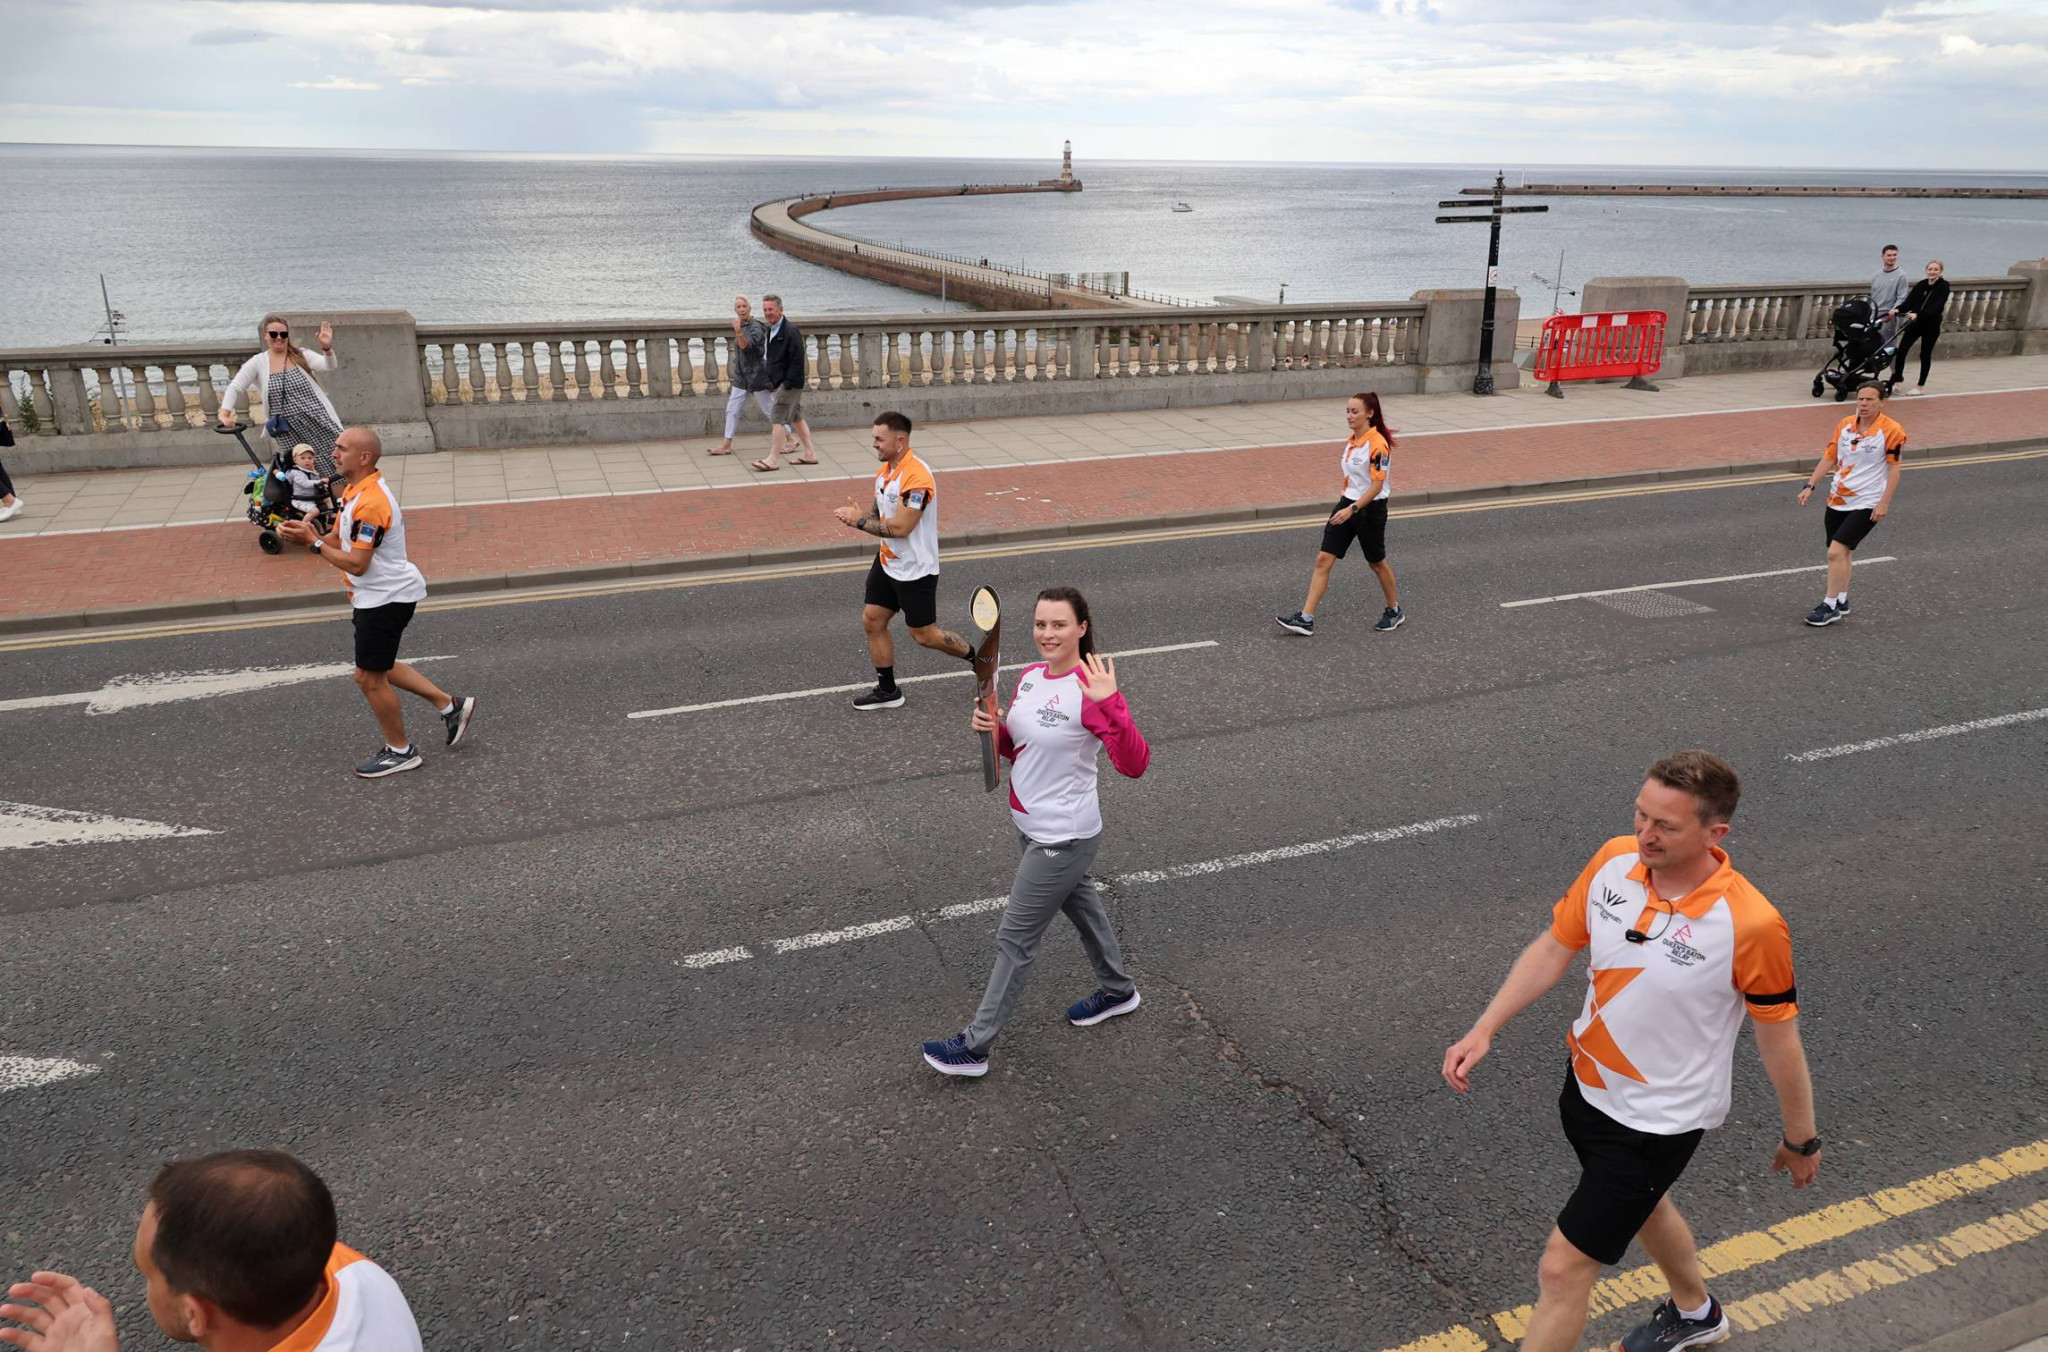 Katie Williamson carries the Baton along the Sunderland seafront in front of the Roker Lighthouse  ©Sunderland City Council/NNP